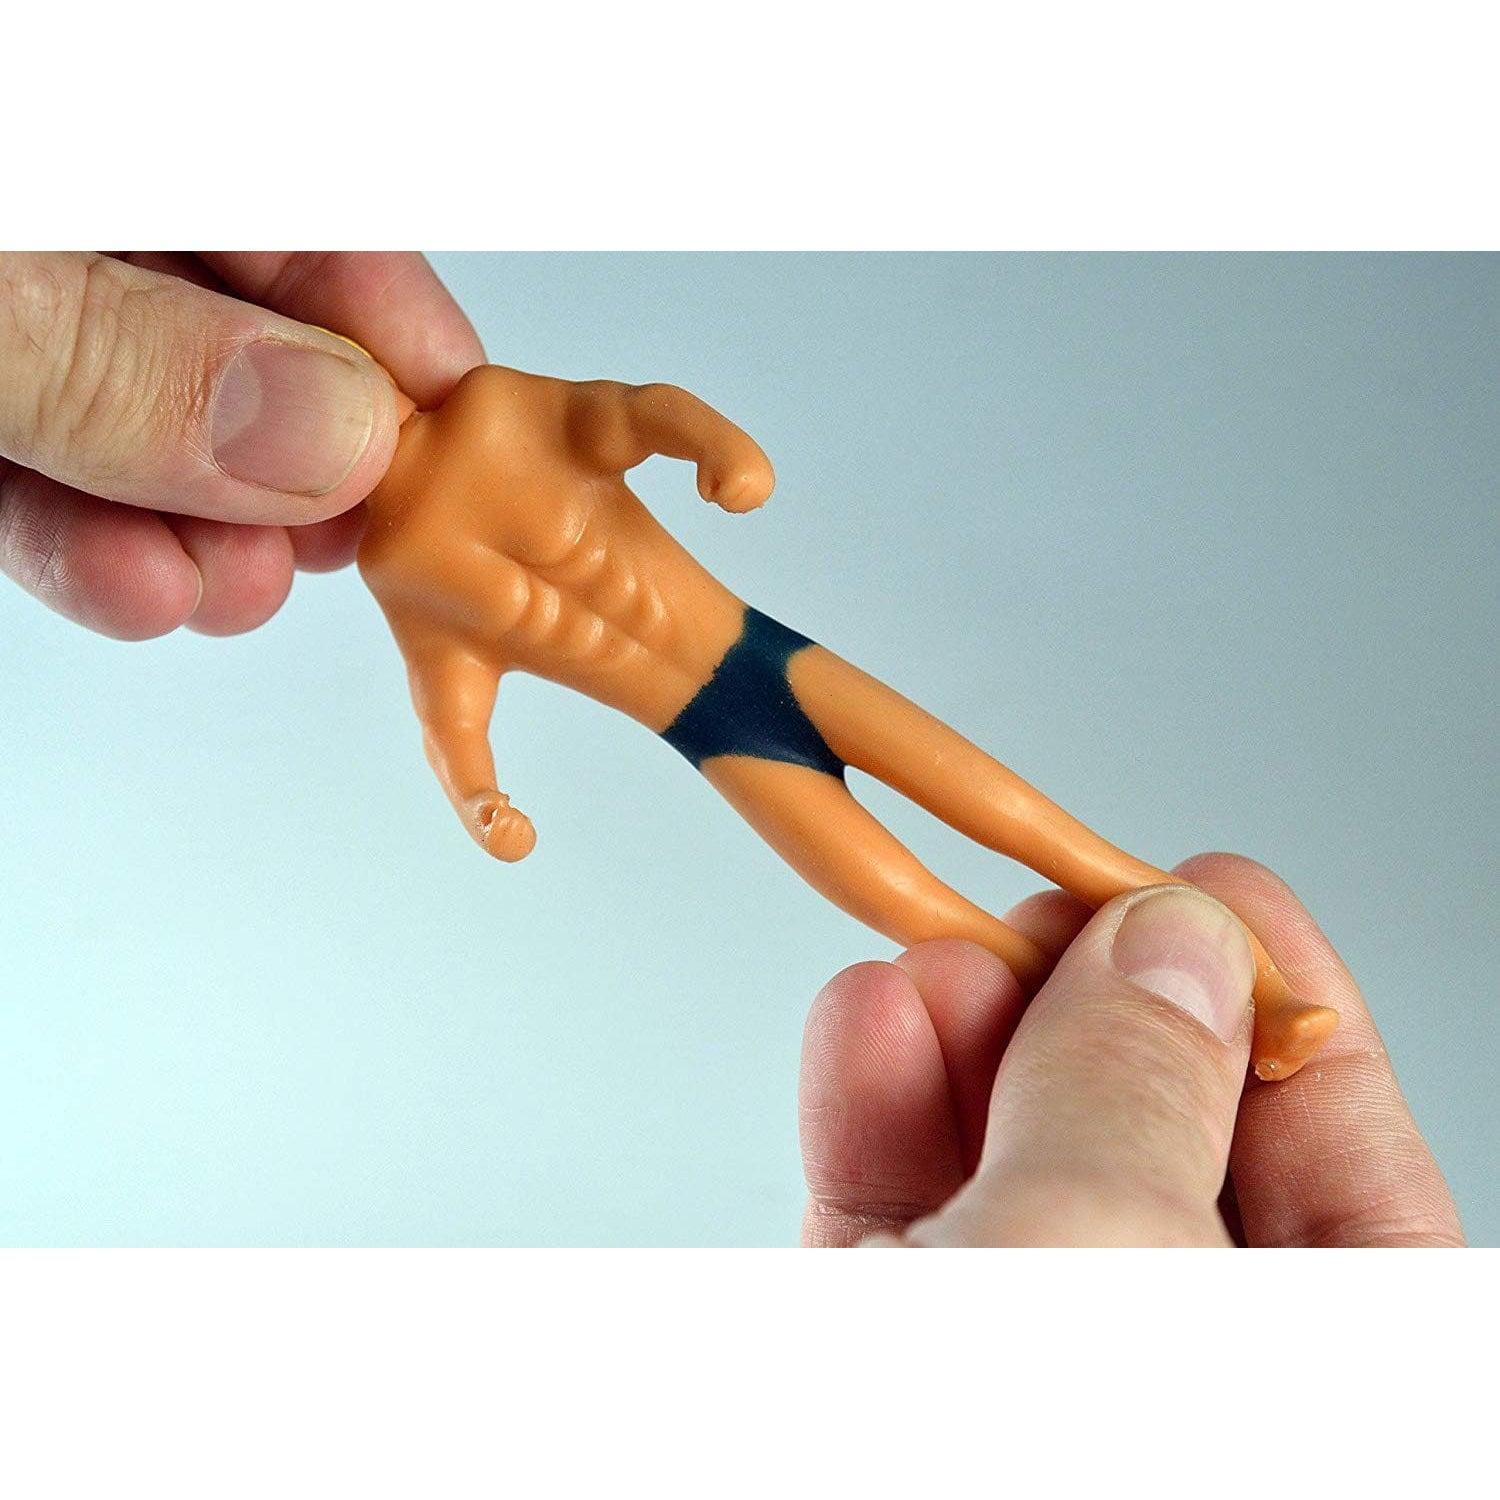 Super Impulse-World's Smallest Stretch Armstrong-512-Legacy Toys